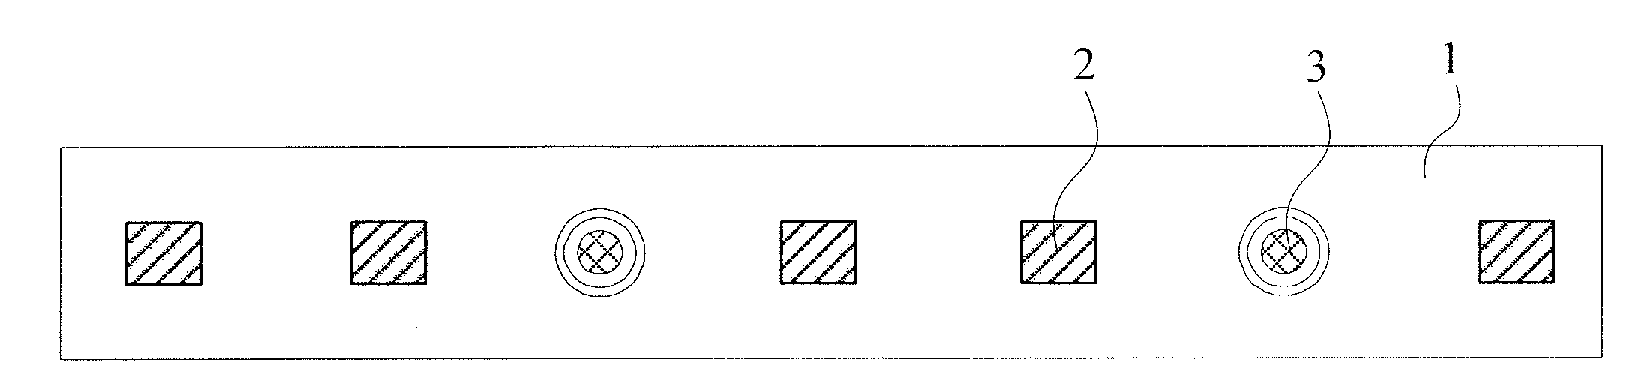 White LED light source, backlight module and display device